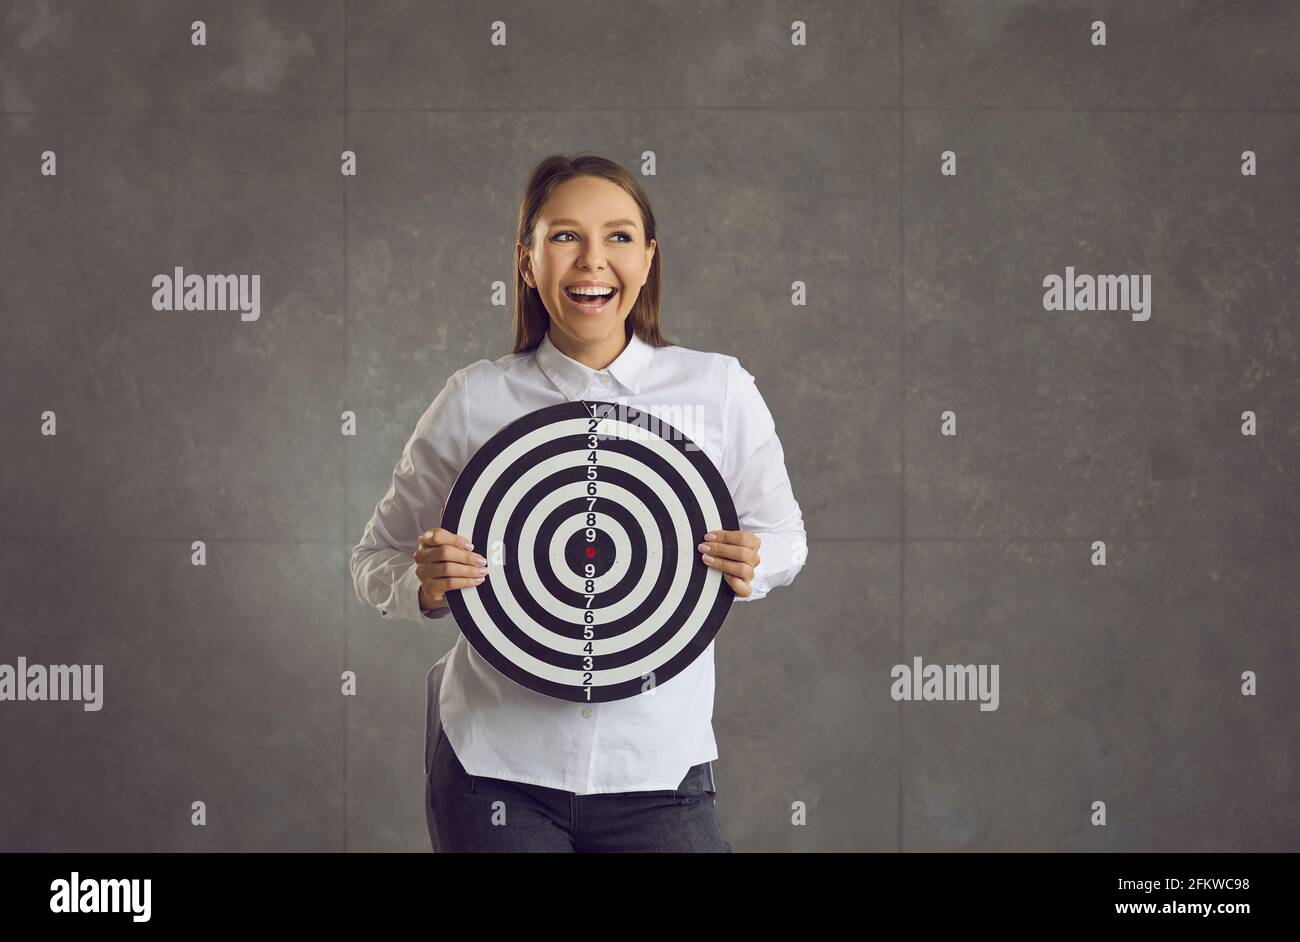 Young loudly laughing woman holding dart board target standing on studio wall Stock Photo